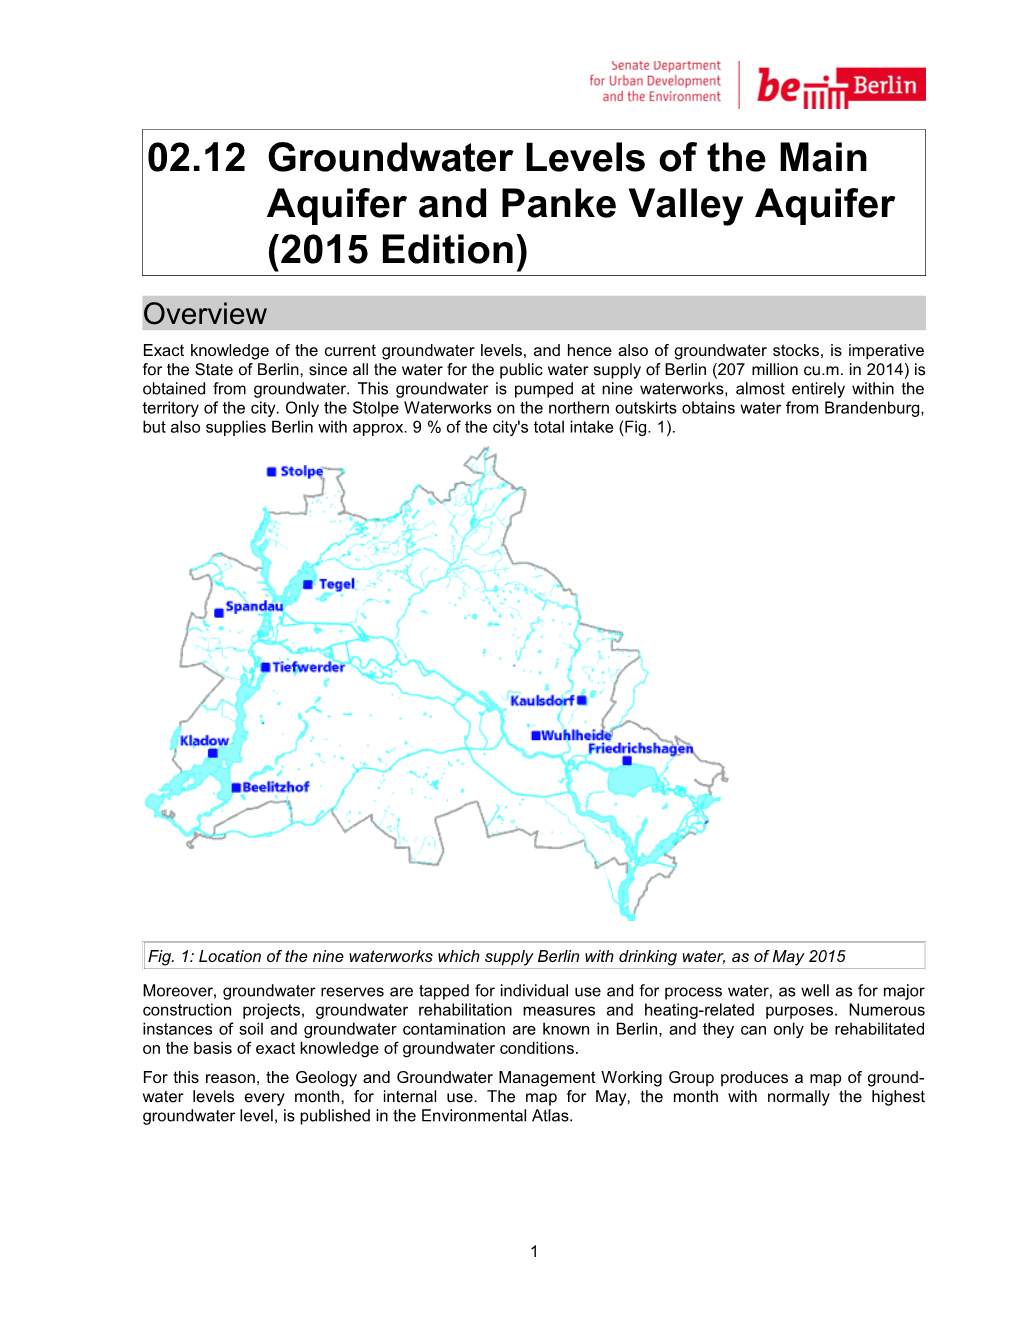 02.12 Groundwater Levels of the Main Aquifer and Panke Valley Aquifer (2015 Edition)